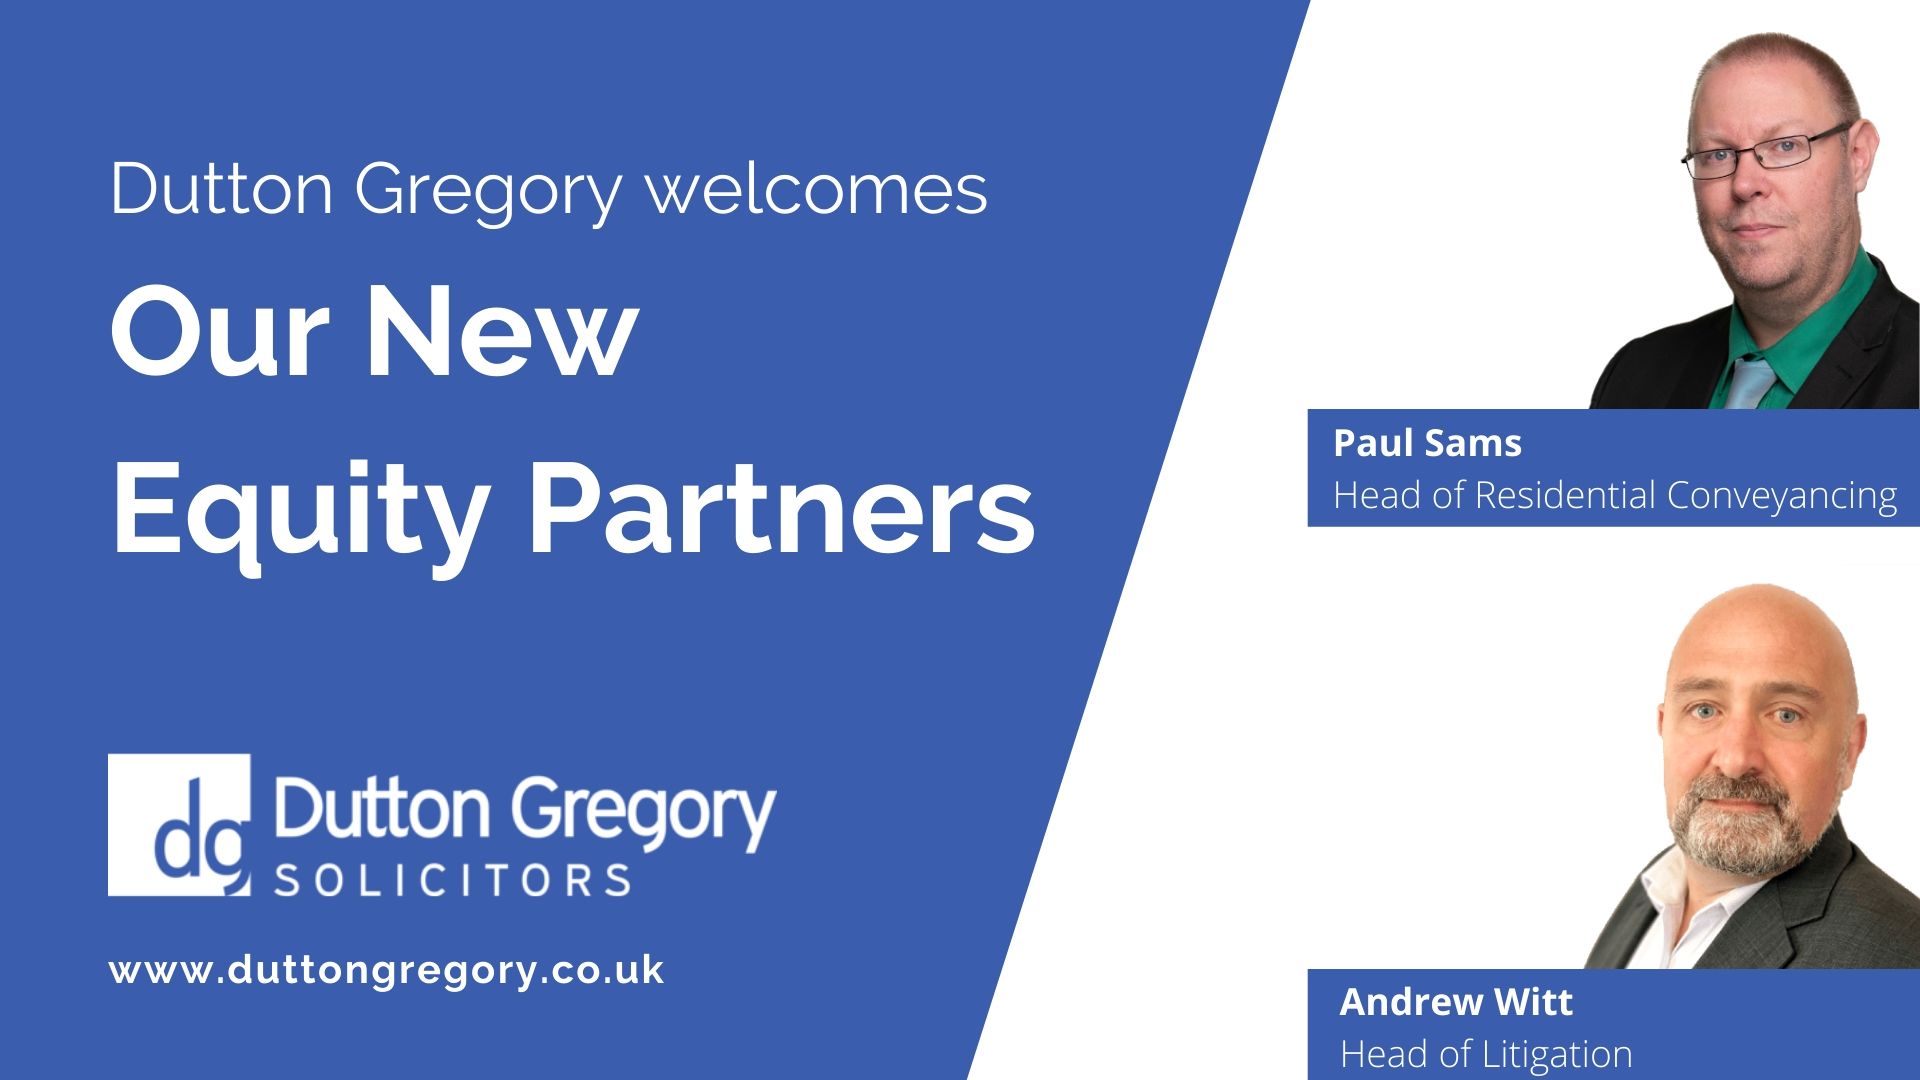  Dutton Gregory welcomes two new Equity Partners